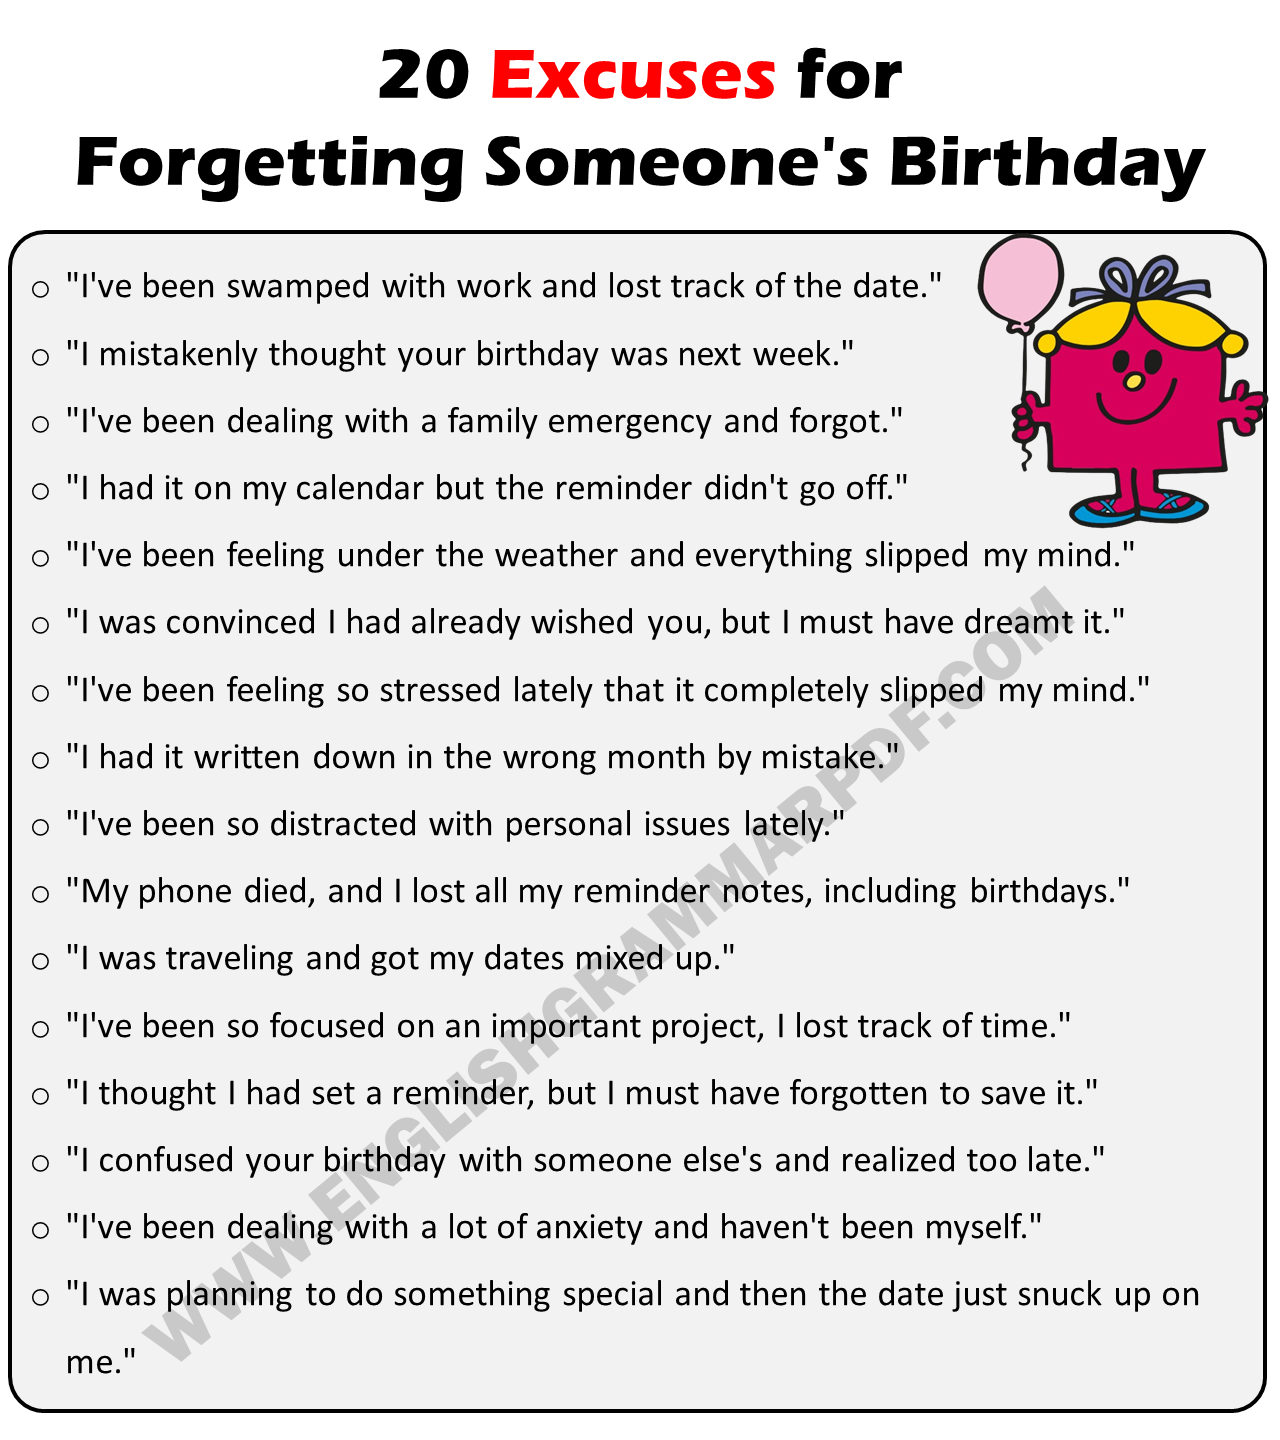 Excuses For Forgetting Someone's Birthday